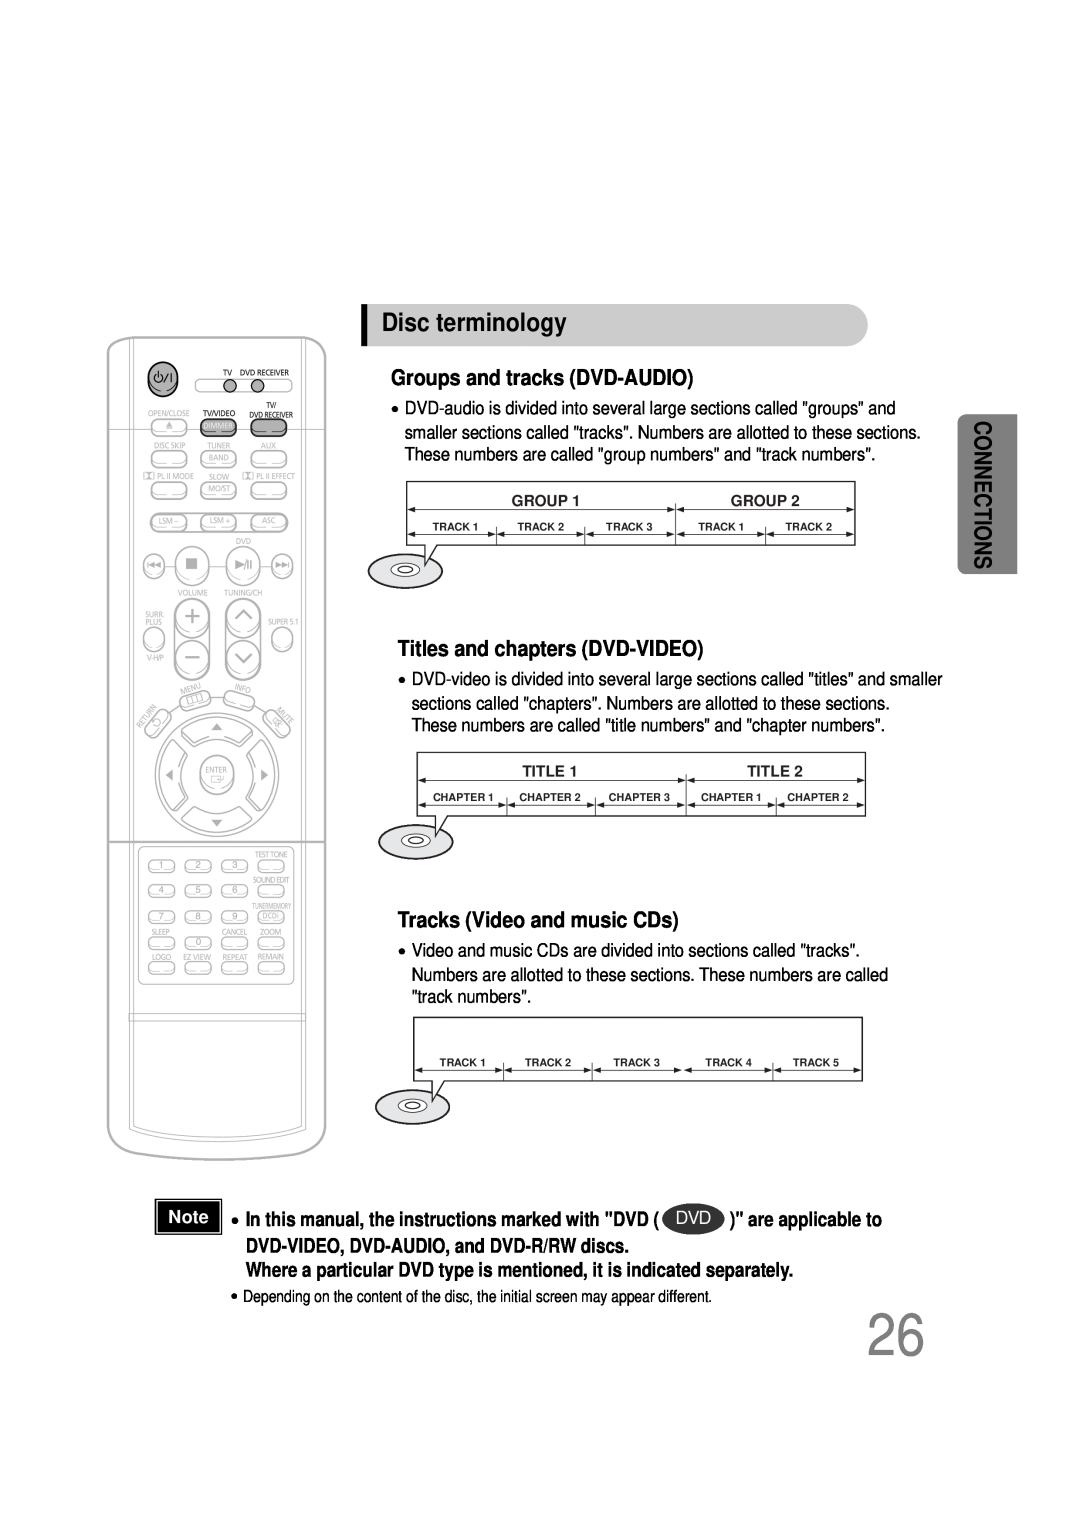 Samsung HT-DS665T Disc terminology, Groups and tracks DVD-AUDIO, Titles and chapters DVD-VIDEO, Tracks Video and music CDs 